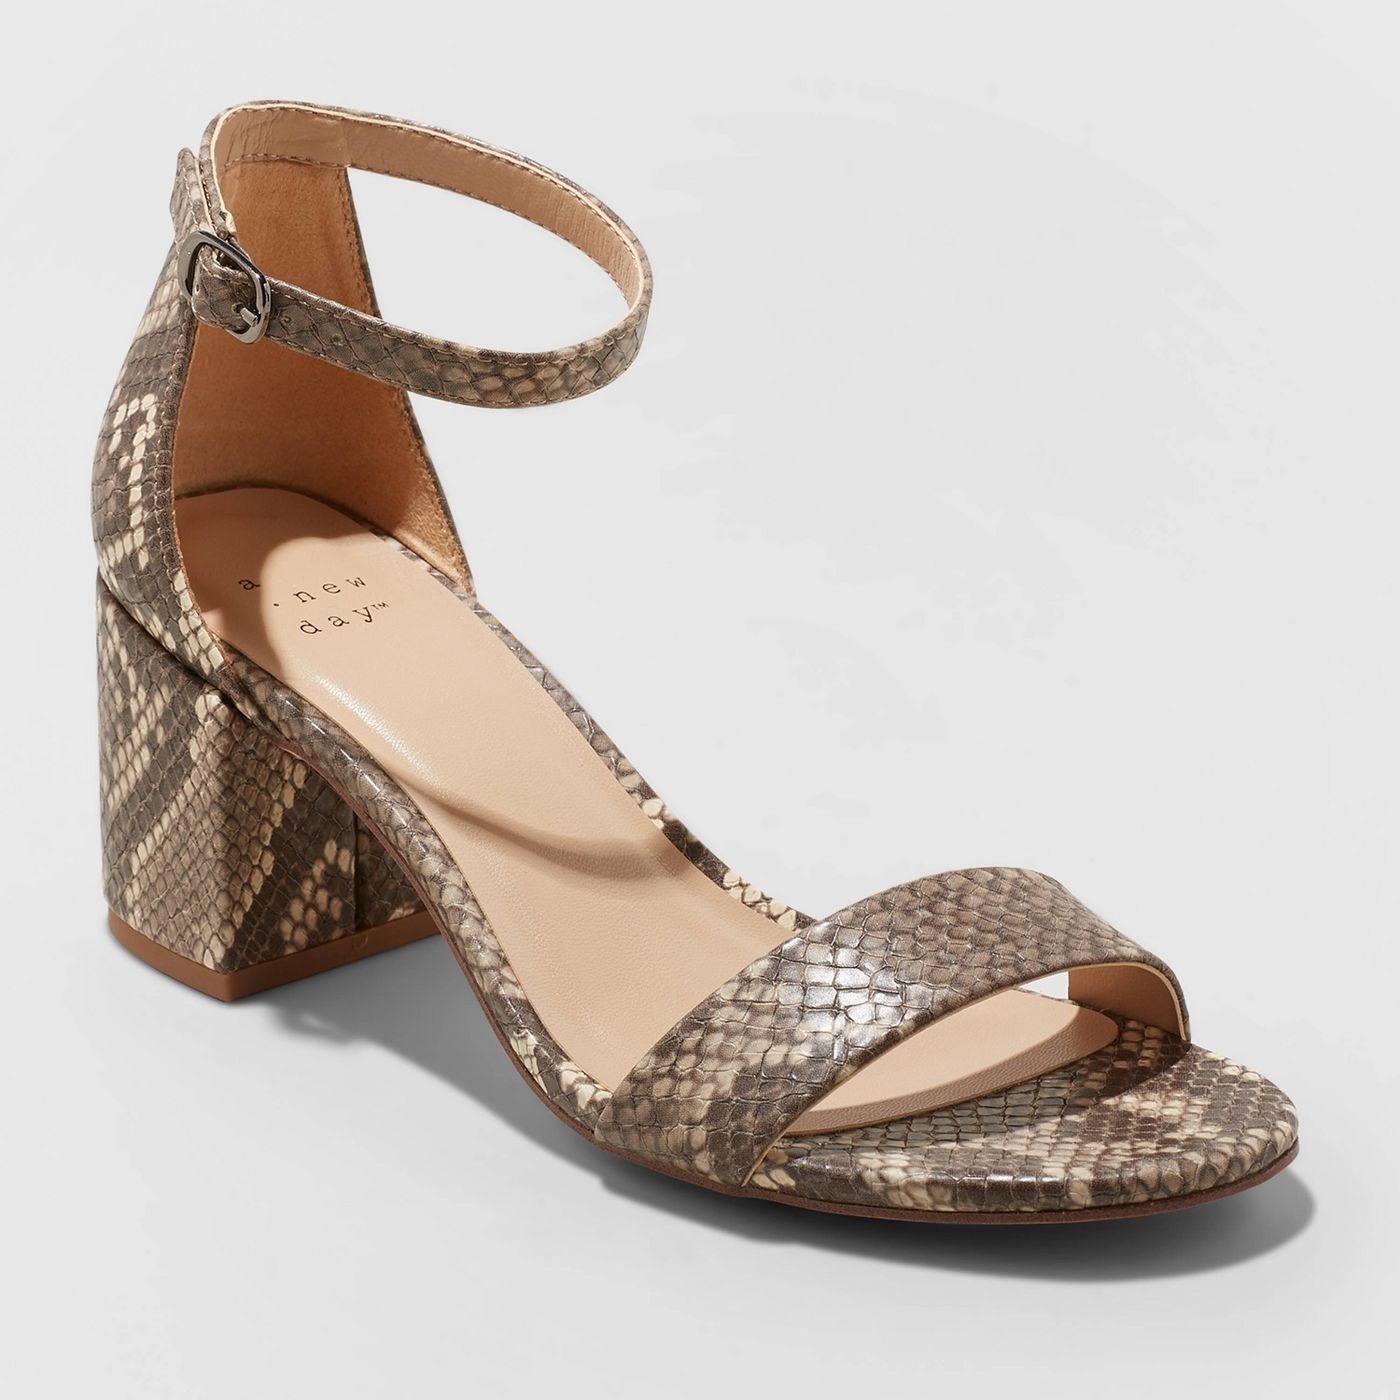 Side view of the sandal with a small block heel and ankle strap in a brown snake-print